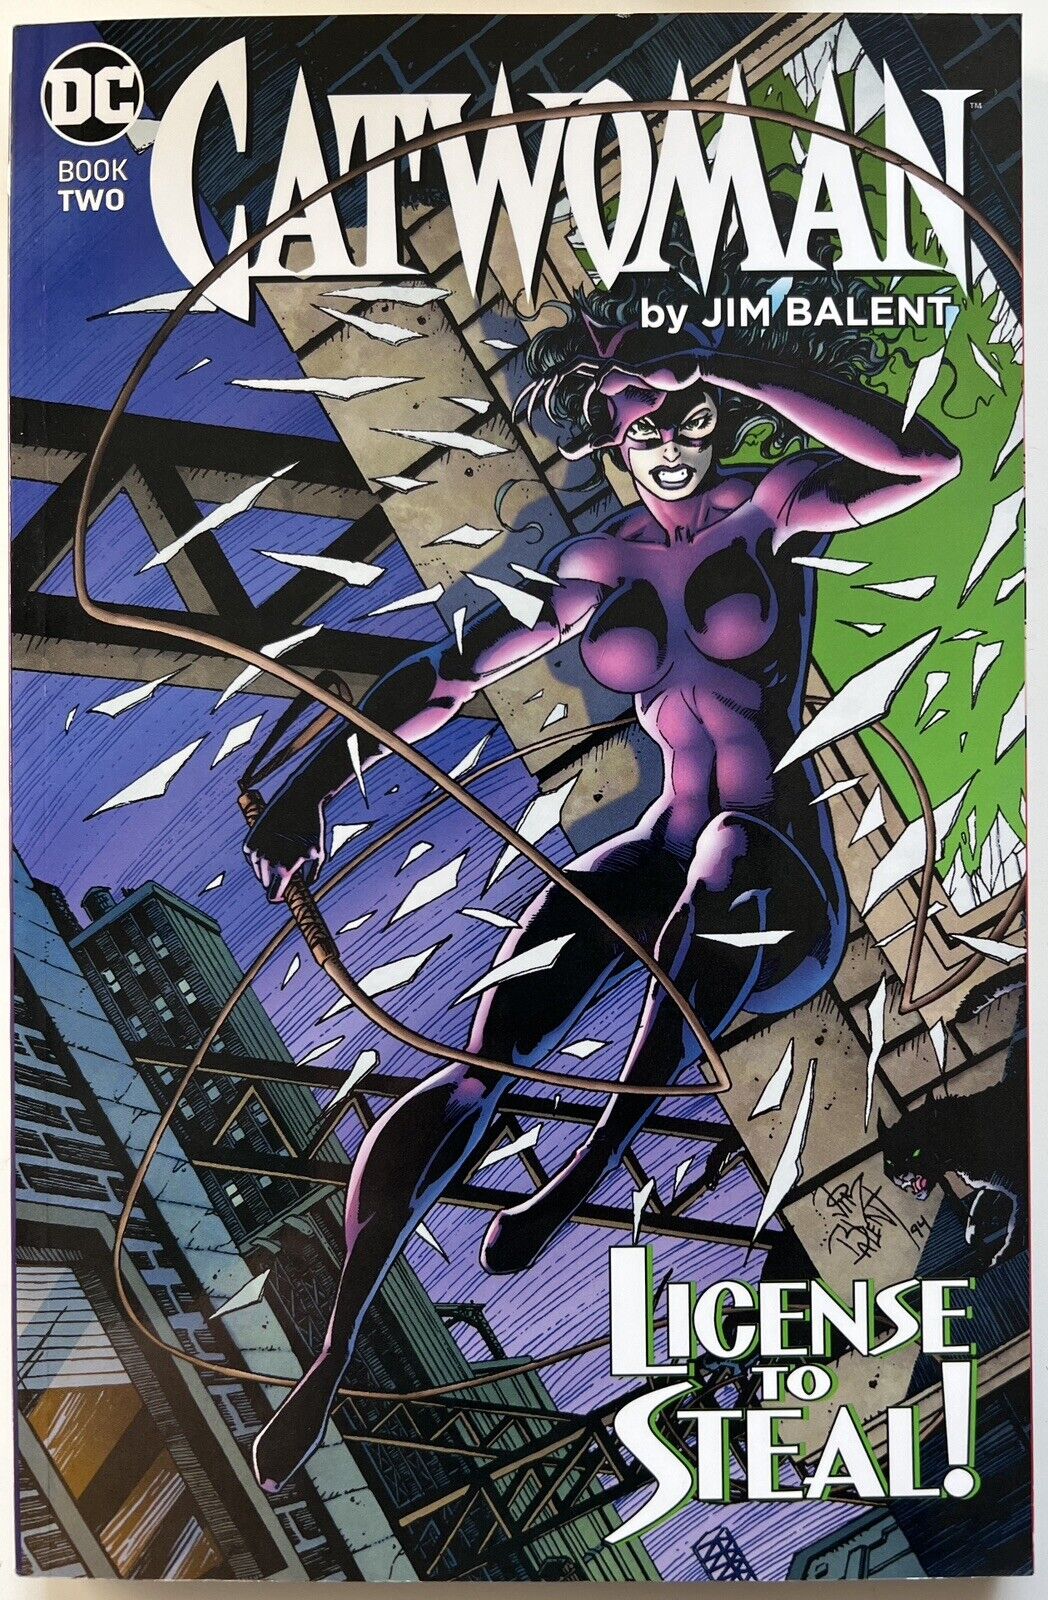 Catwoman by Jim Balent Book Two Vol 2 License to Steal TPB DC Comics